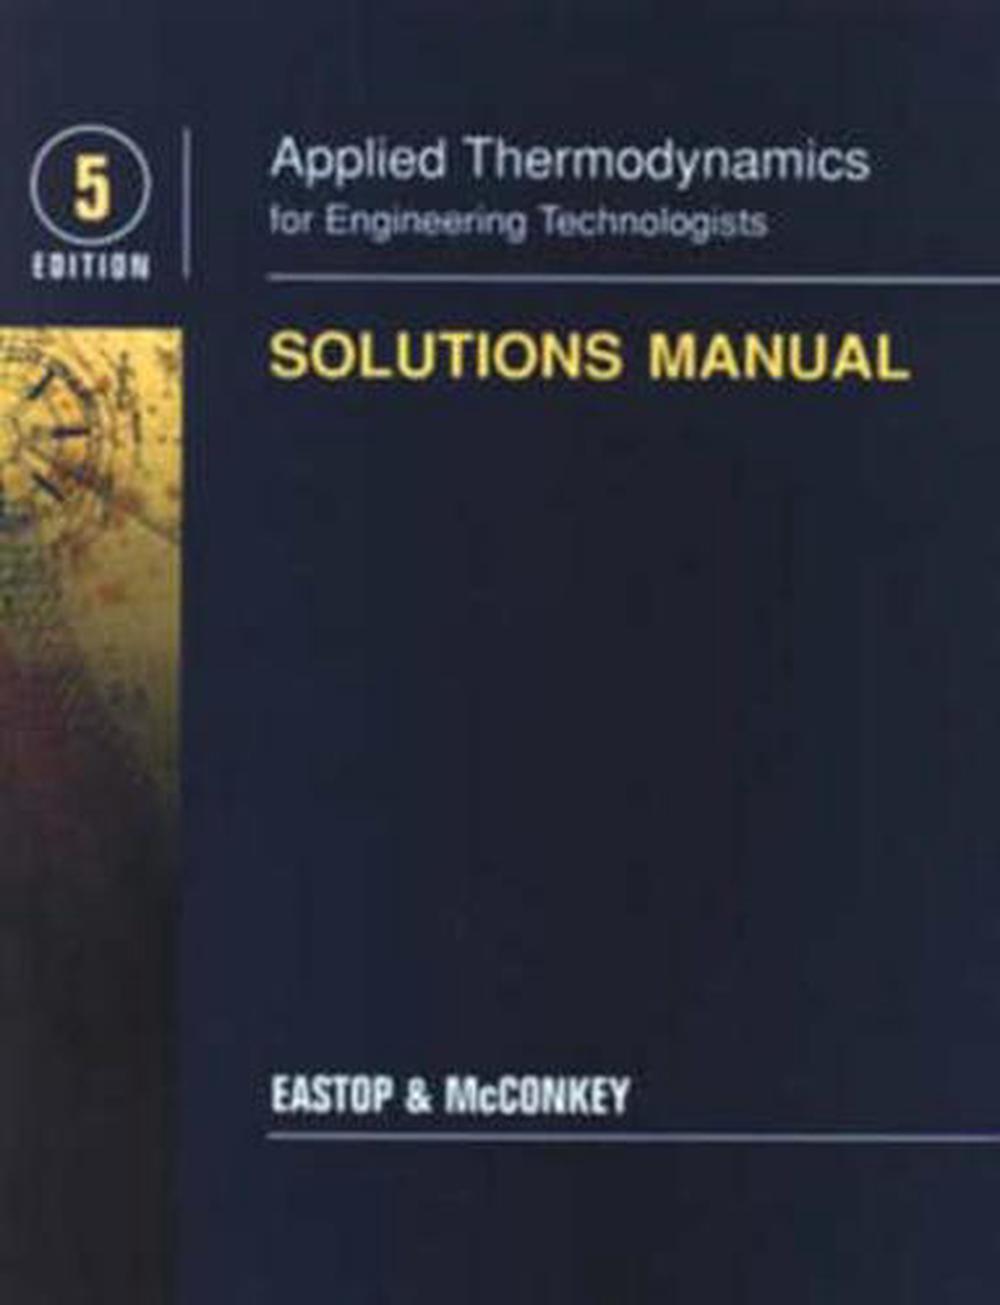 Applied Thermodynamics for Engineering Technologists Student Solutions Manual by A. McConkey